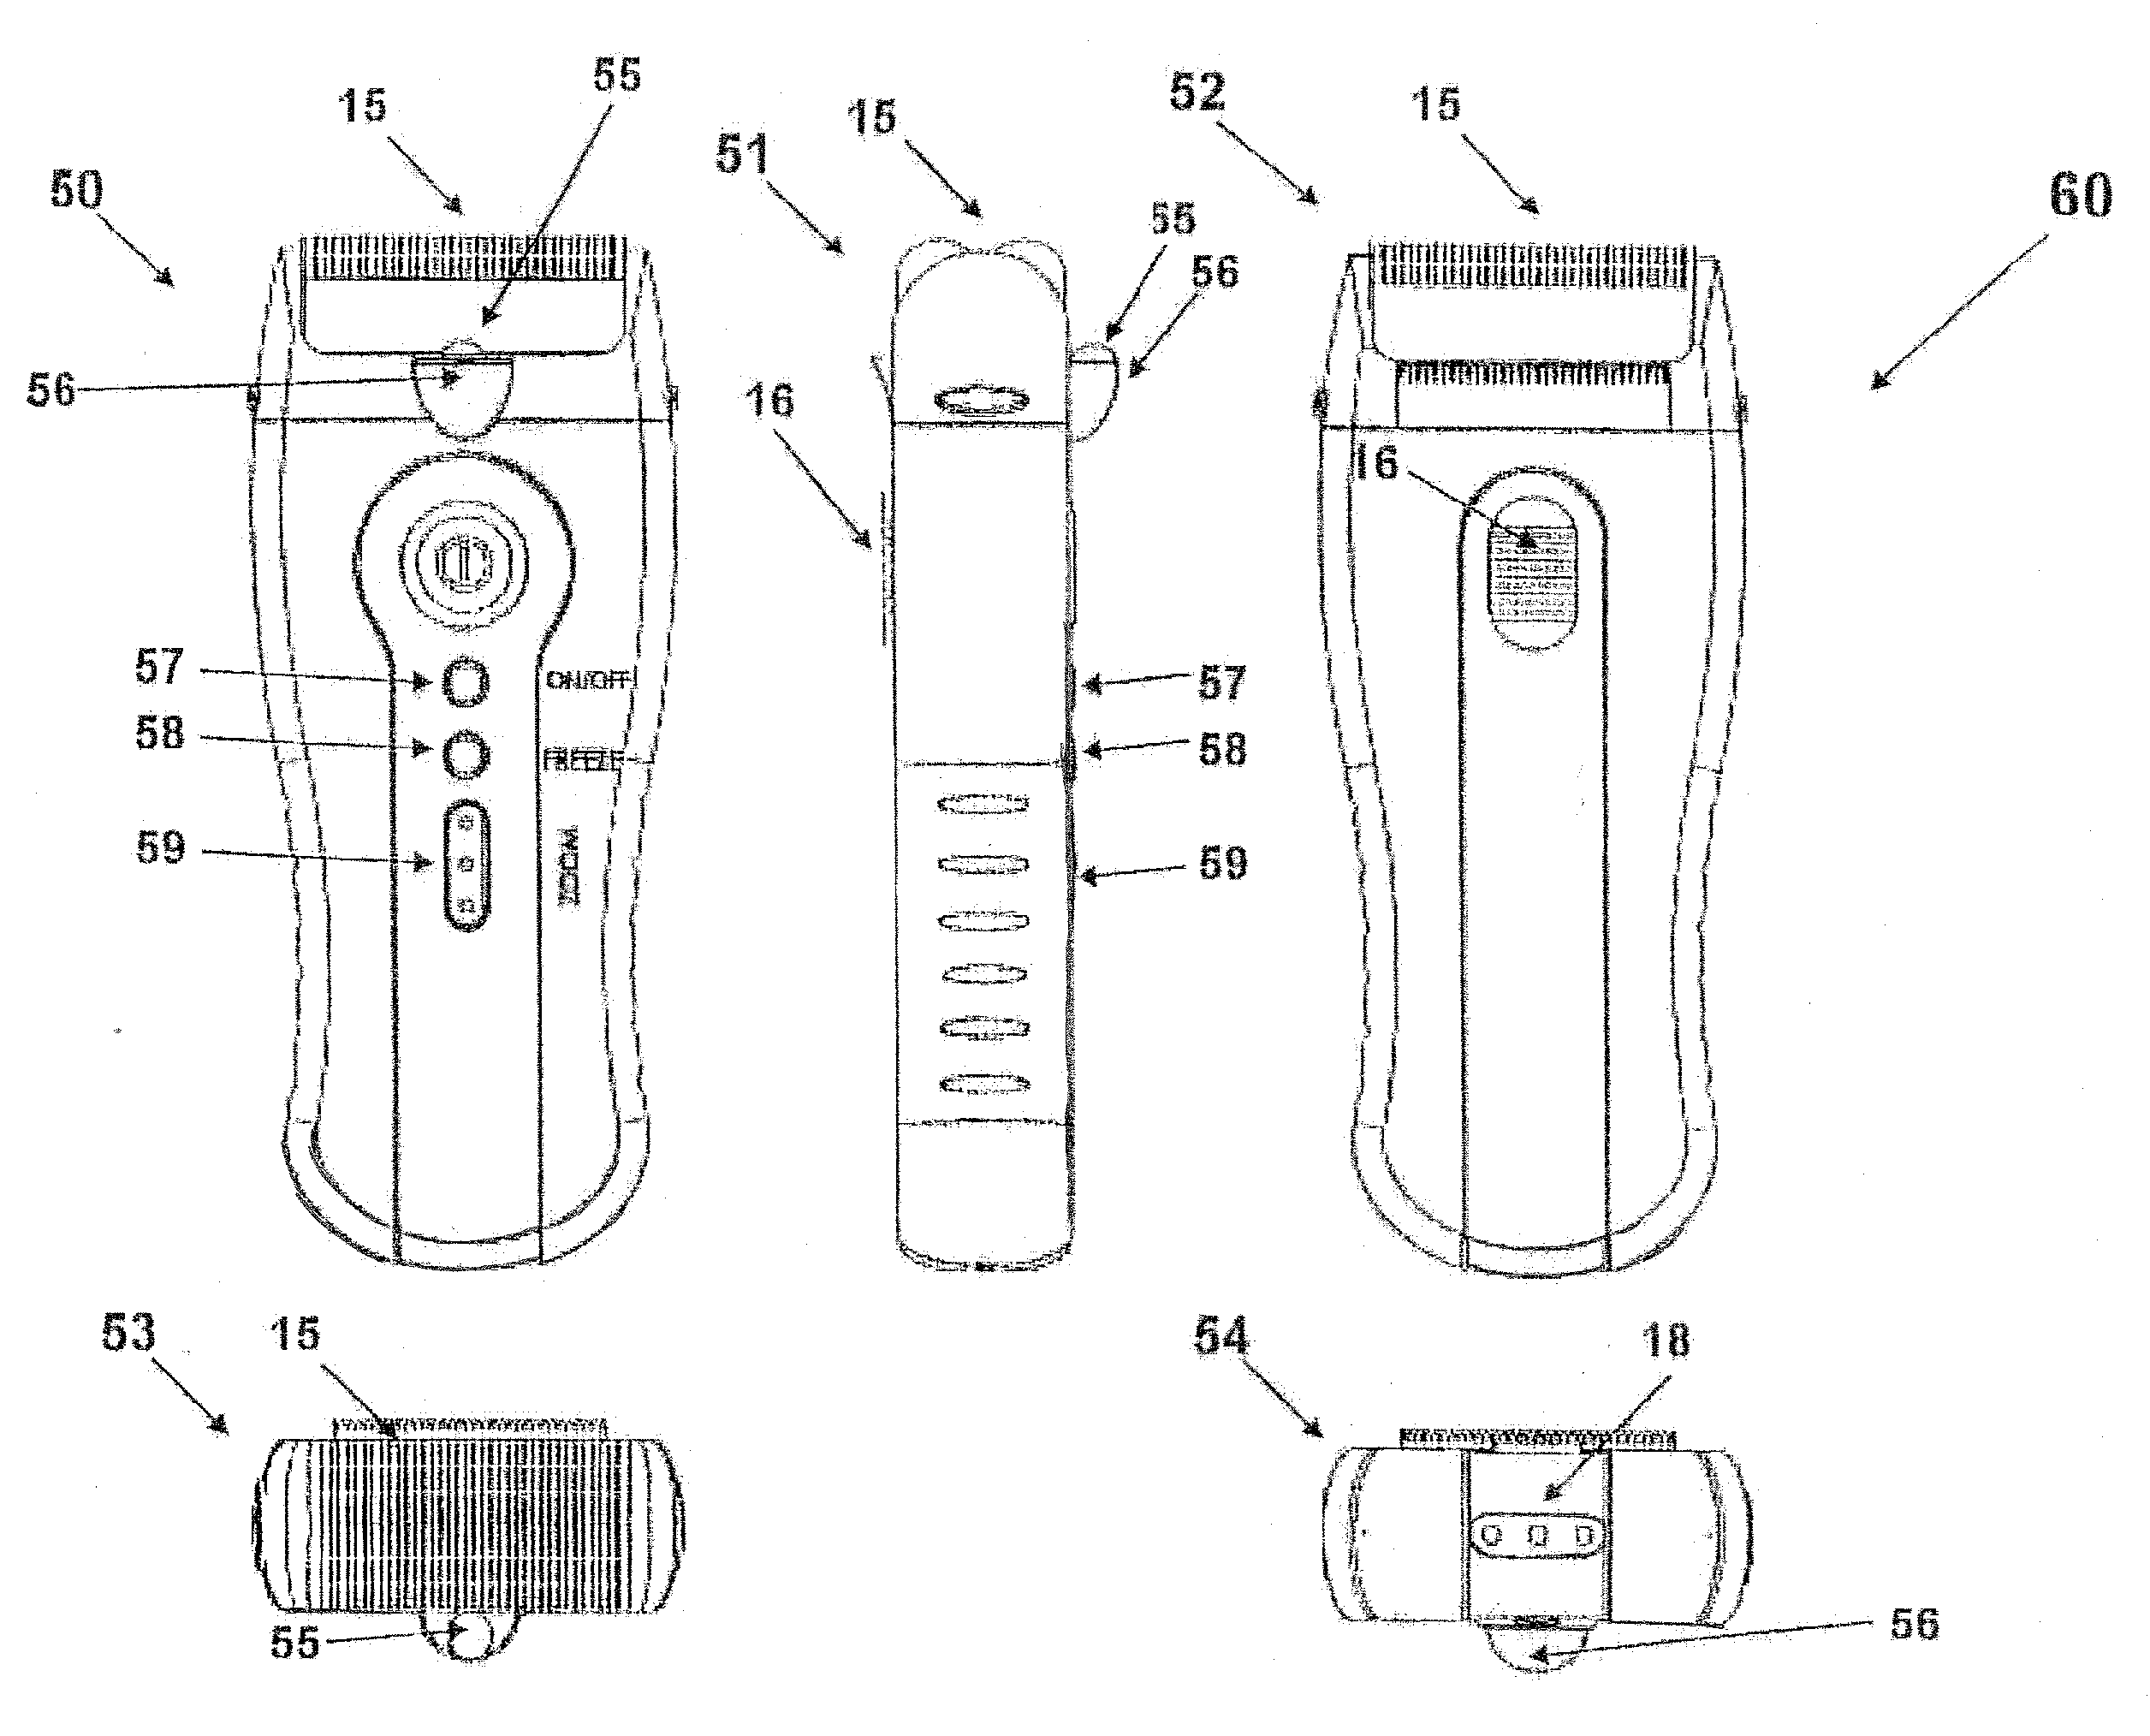 Electric shaver with imaging capability